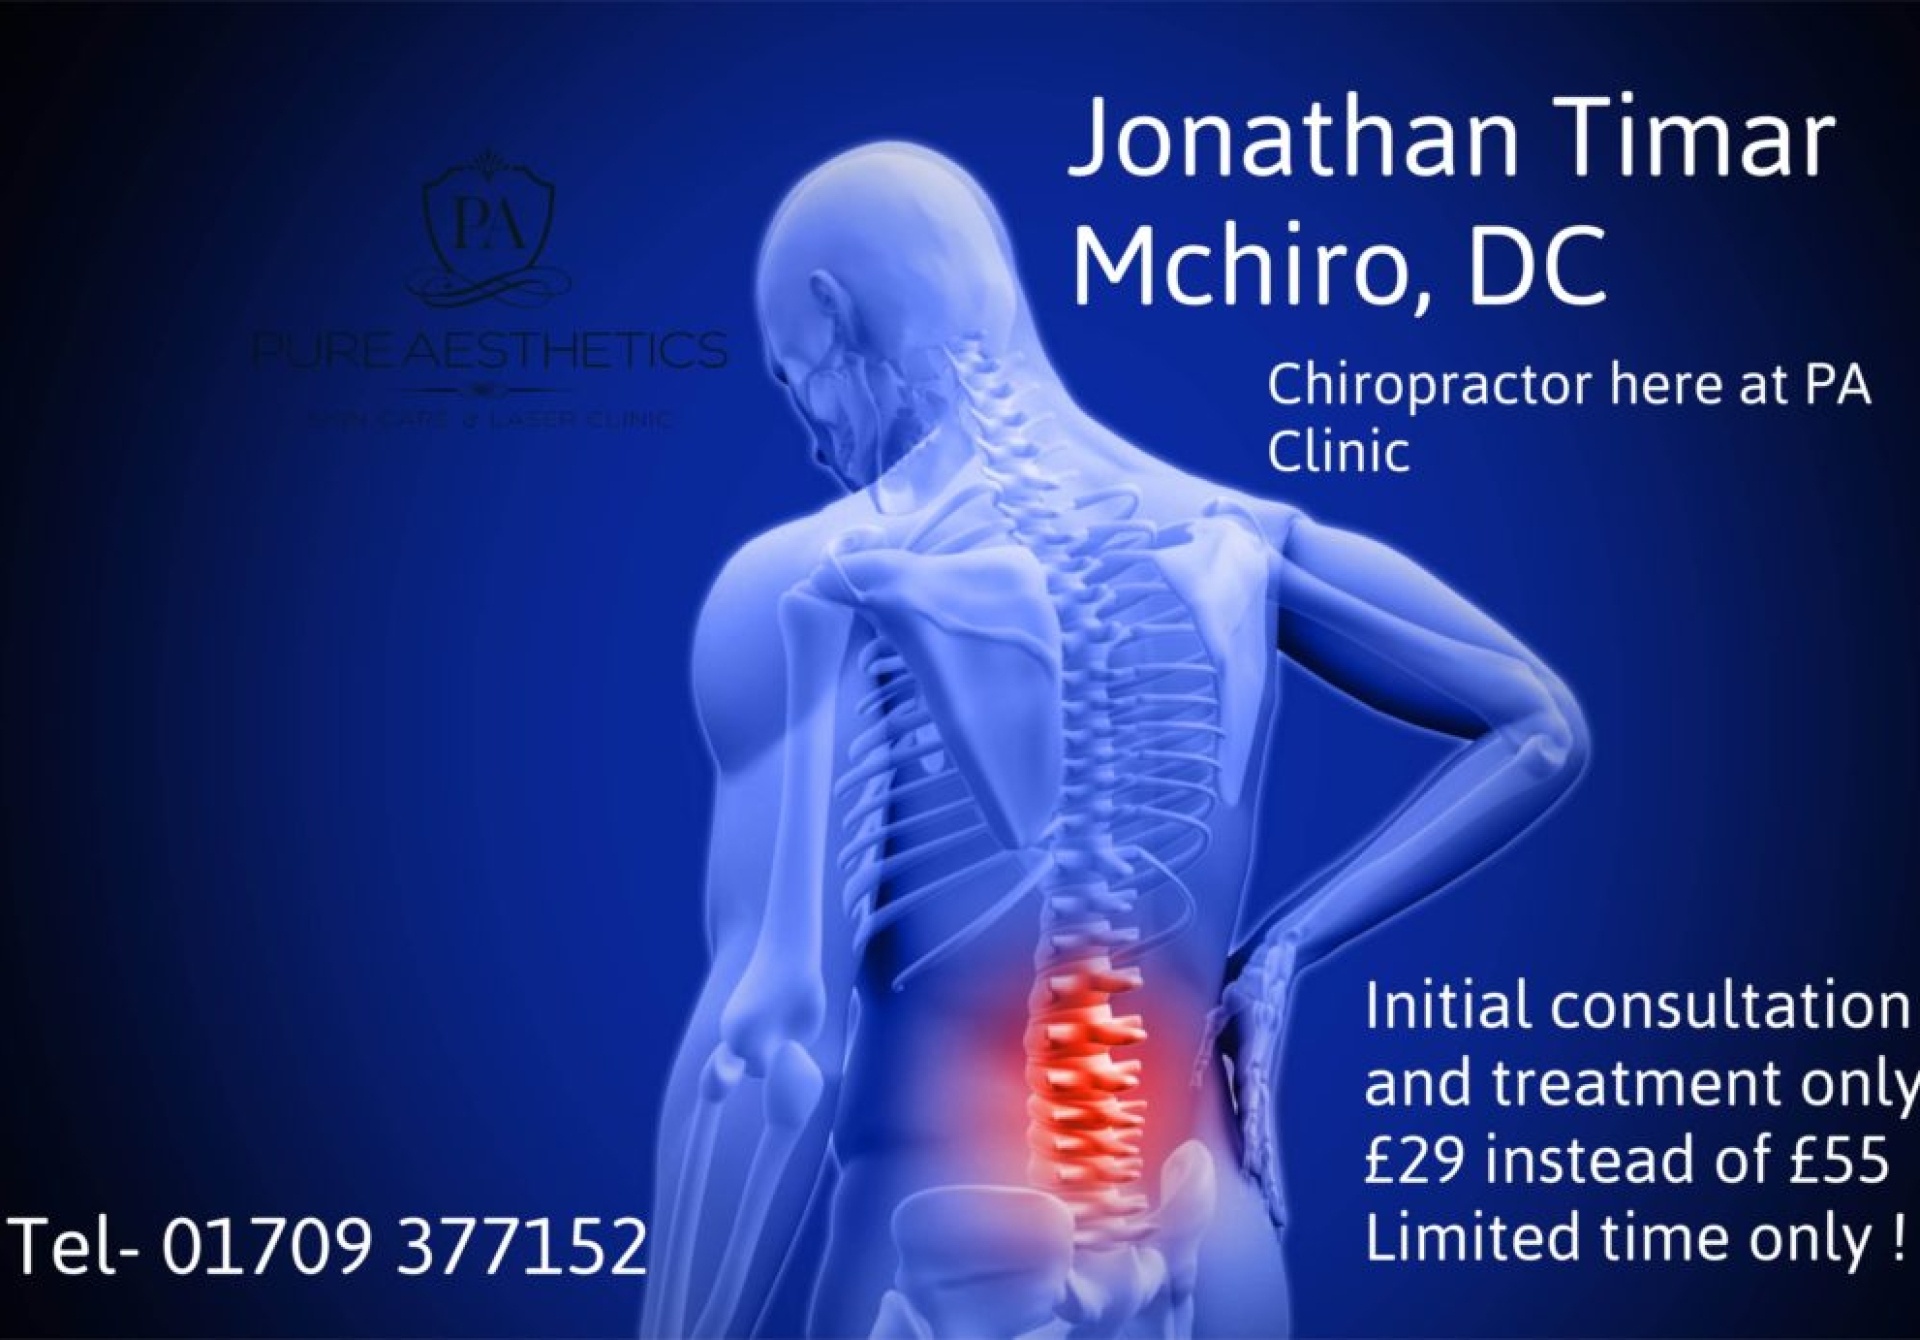 Chiropractic Consultation Offer